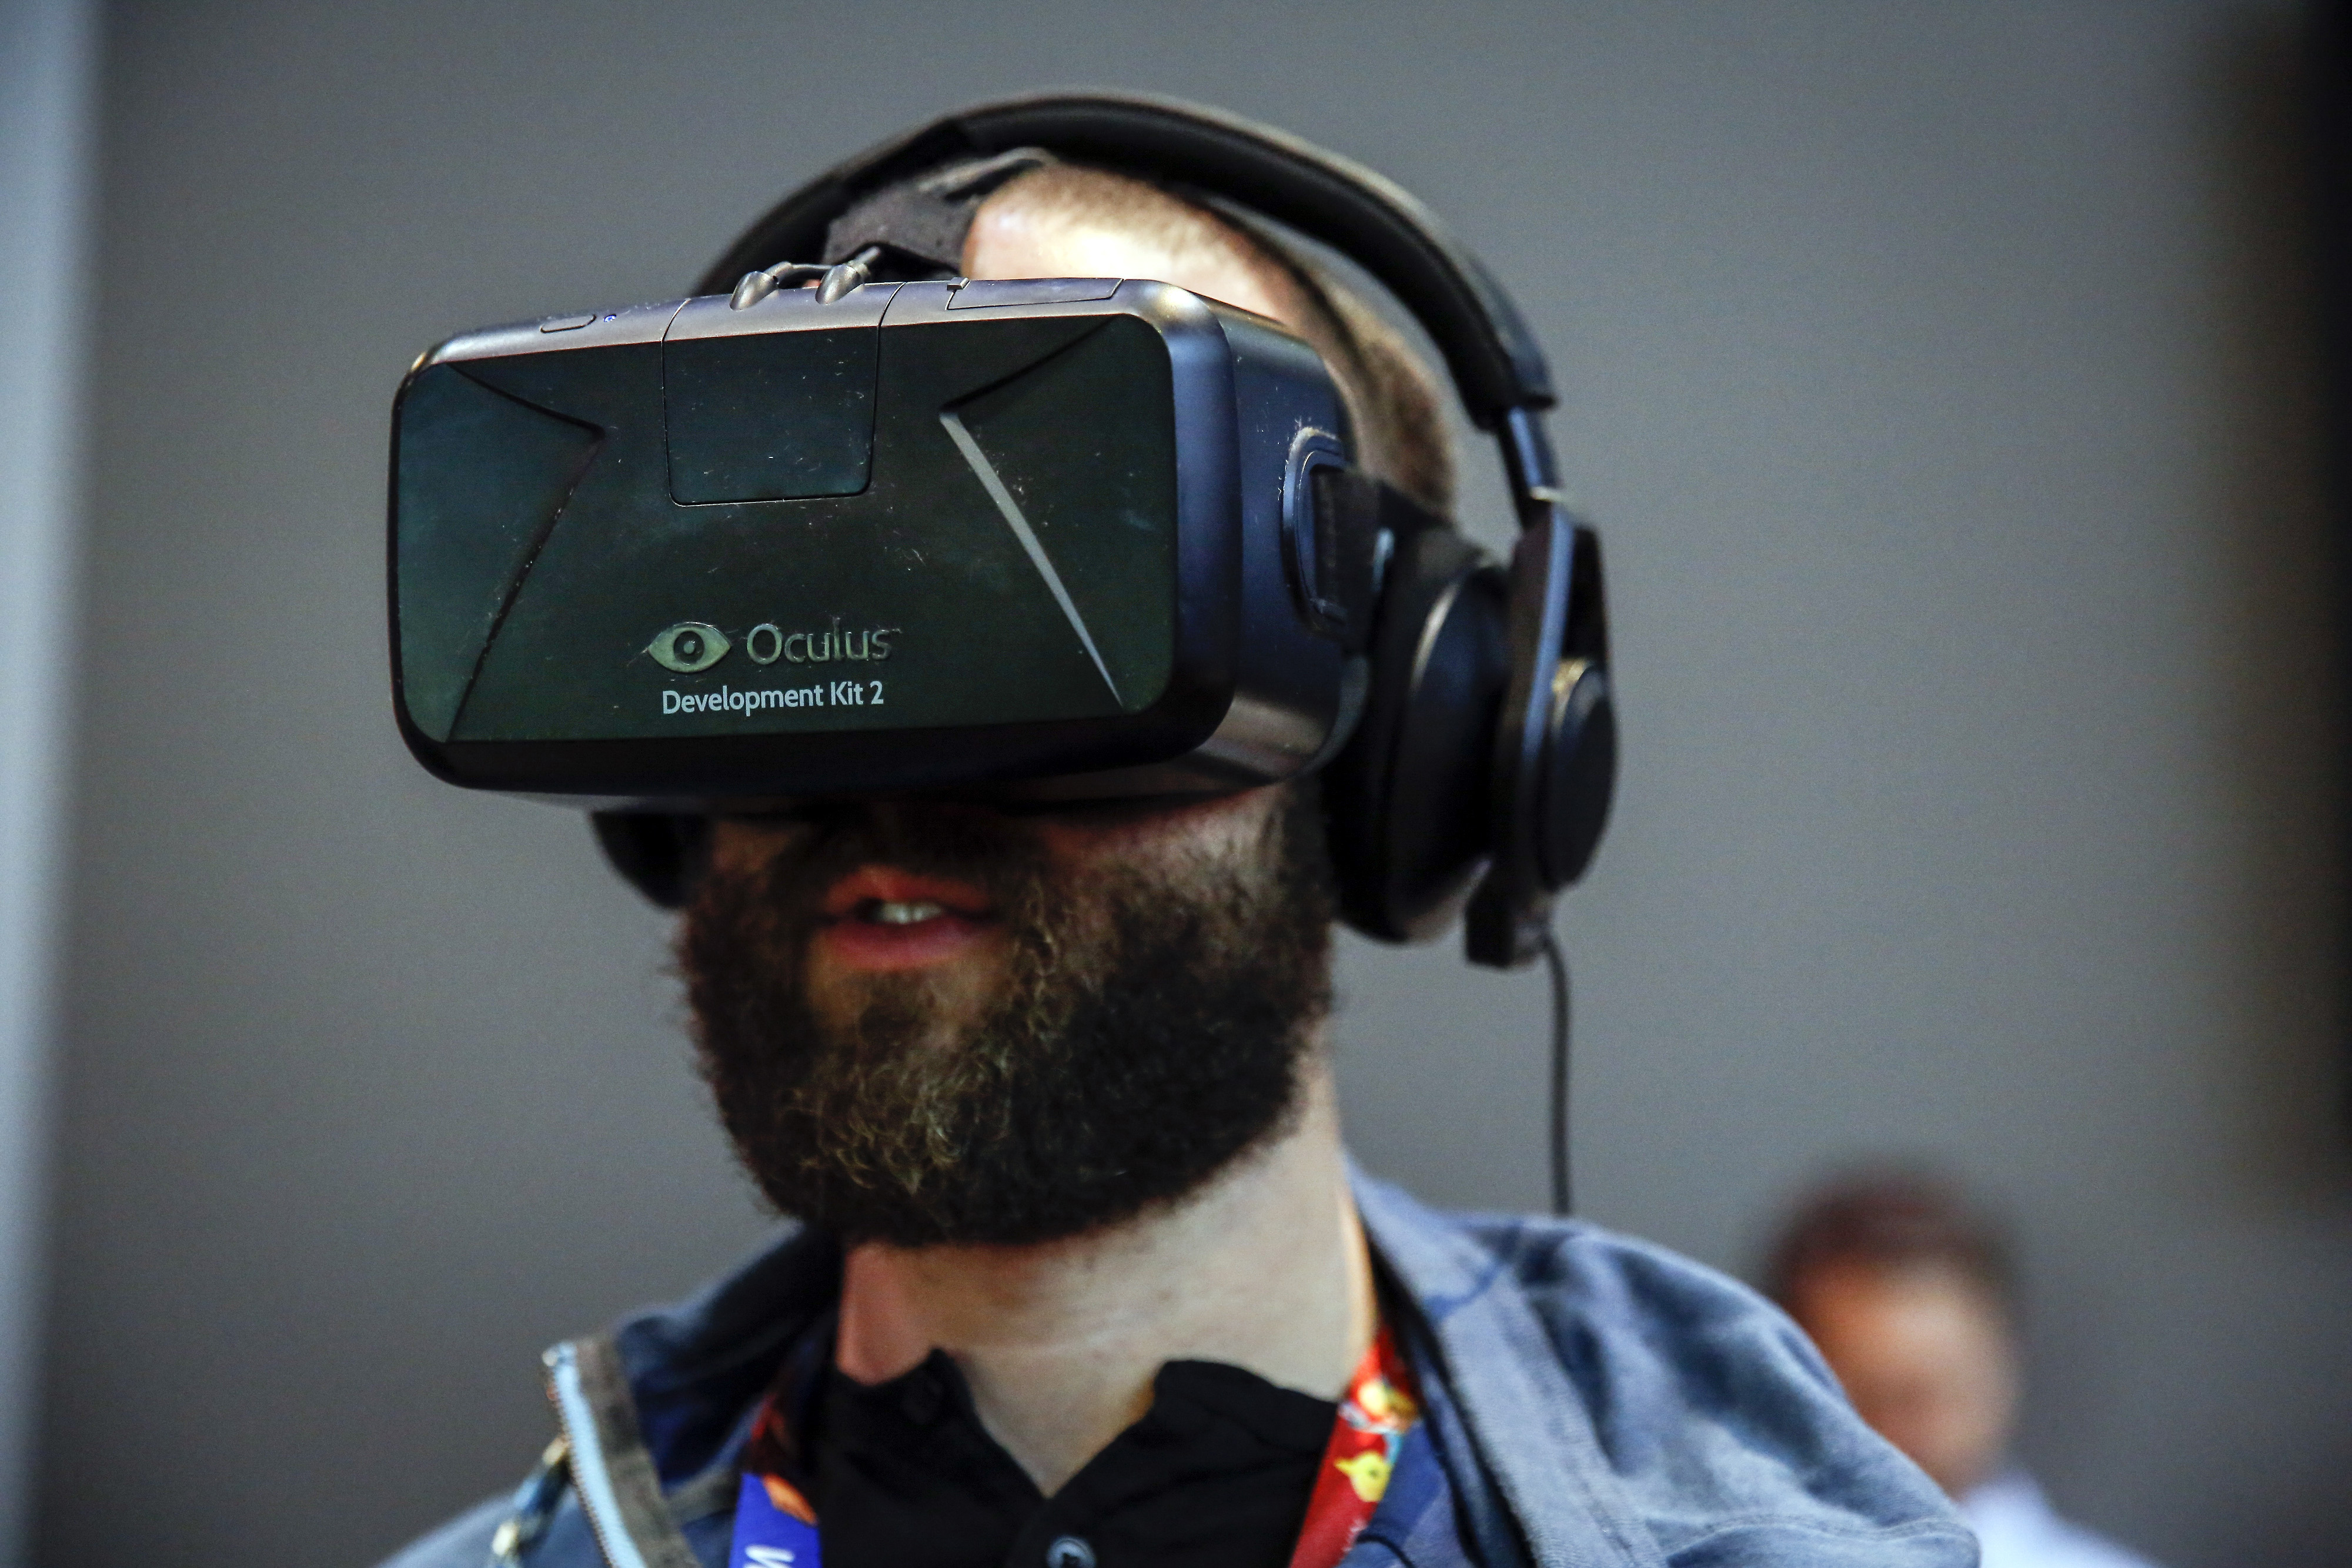 An attendee wears an Oculus VR Inc. Rift Development Kit 2 headset to play a video game during the E3 Electronic Entertainment Expo (Bloomberg&mdash;Bloomberg via Getty Images)